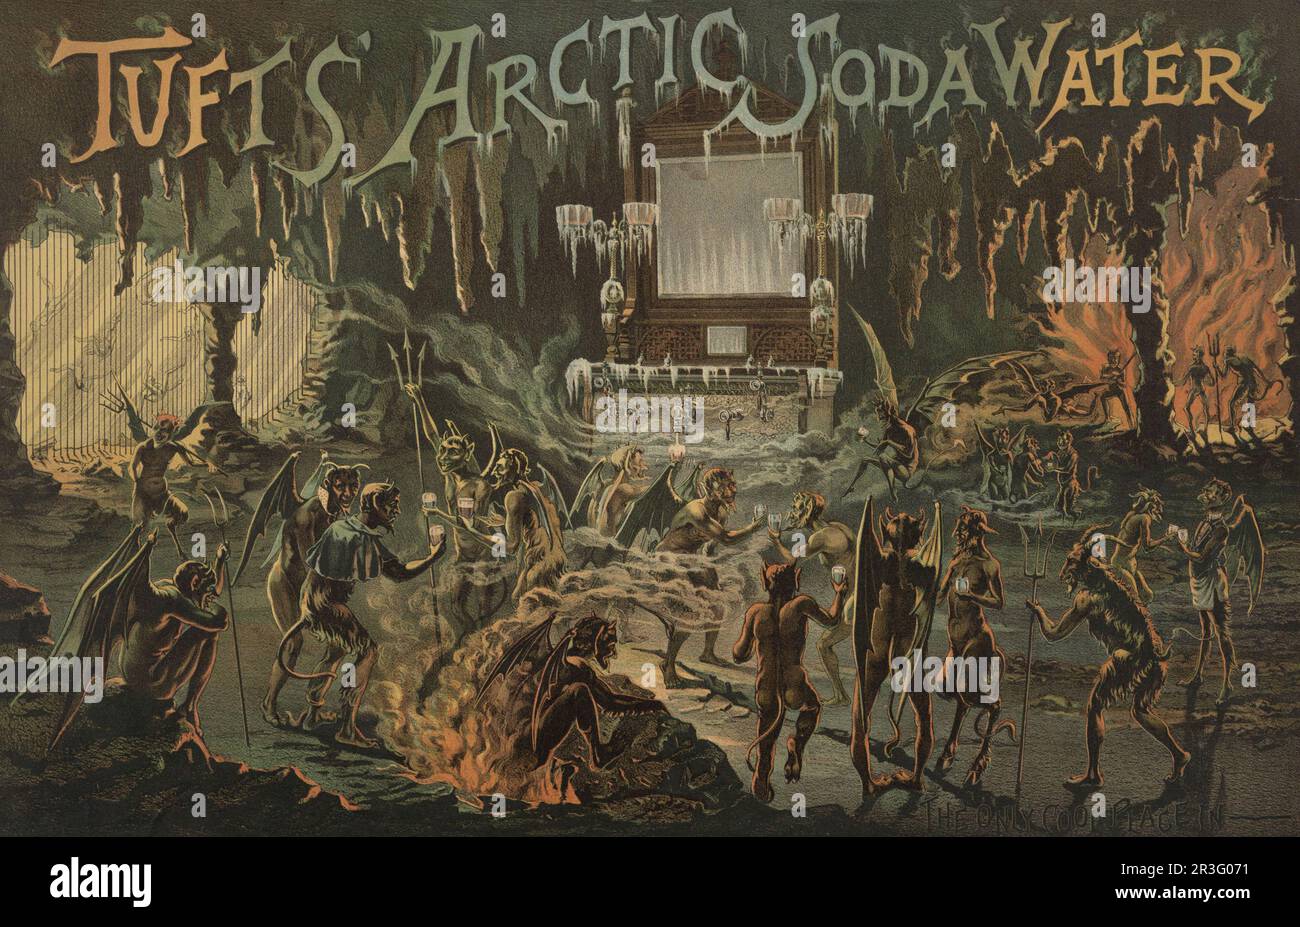 Vintage advertisement for Tufts' Arctic Soda Water. Devils and demons in a fiery hell gather around a large bar. Stock Photo